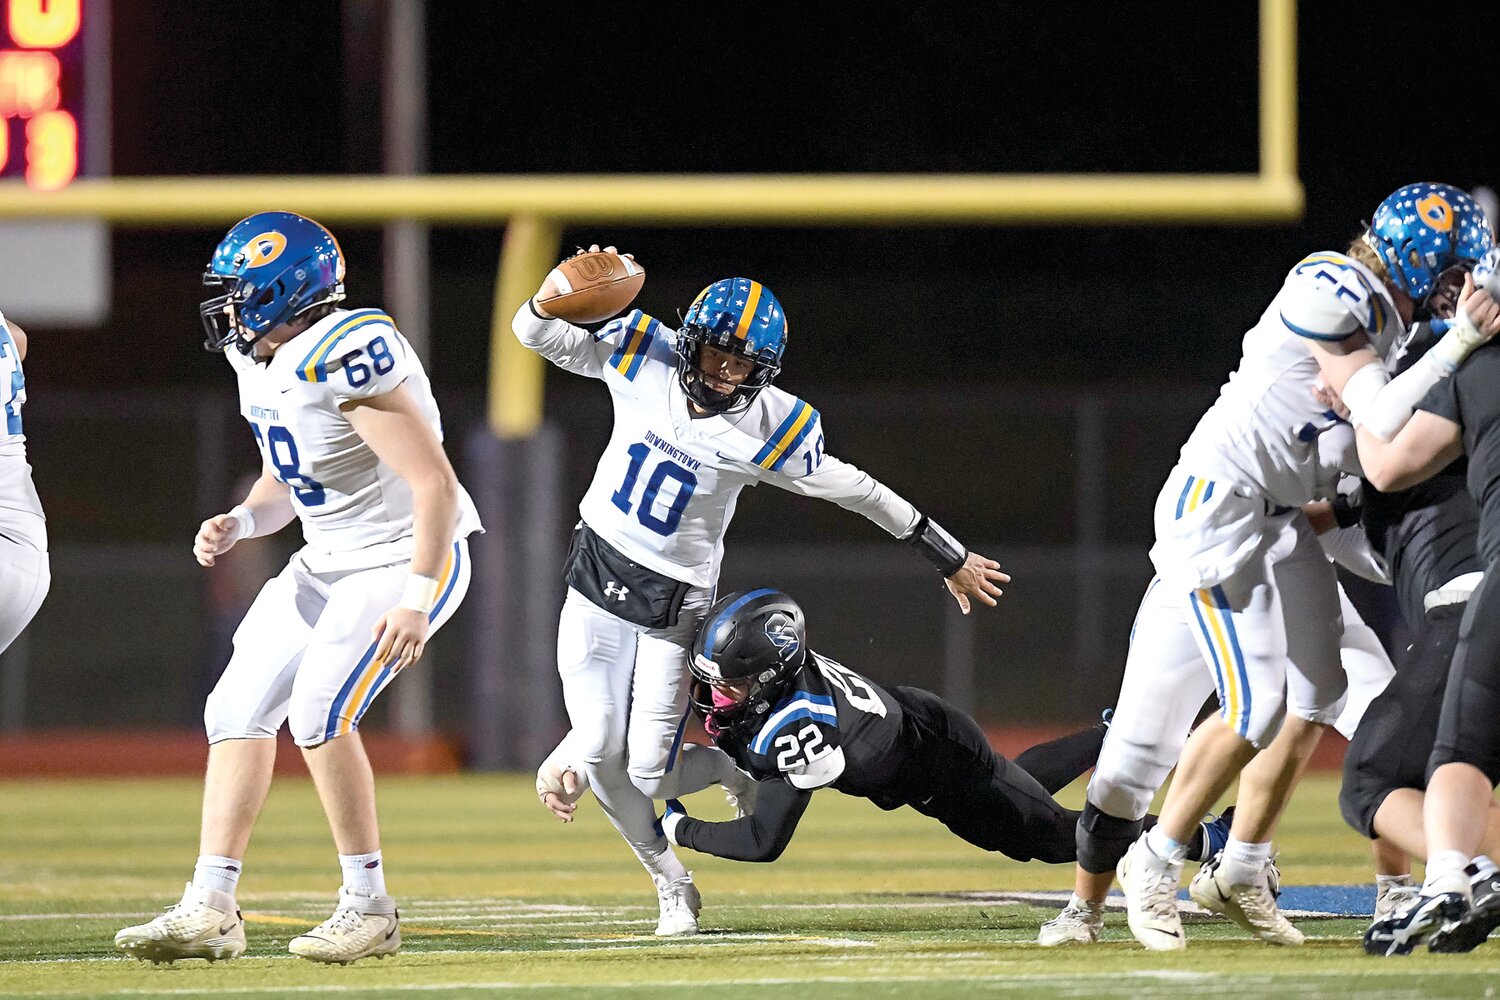 Downingtown West’s Quinn Henicle tries to cut up field while getting tackled by CB South’s Jim Wade.